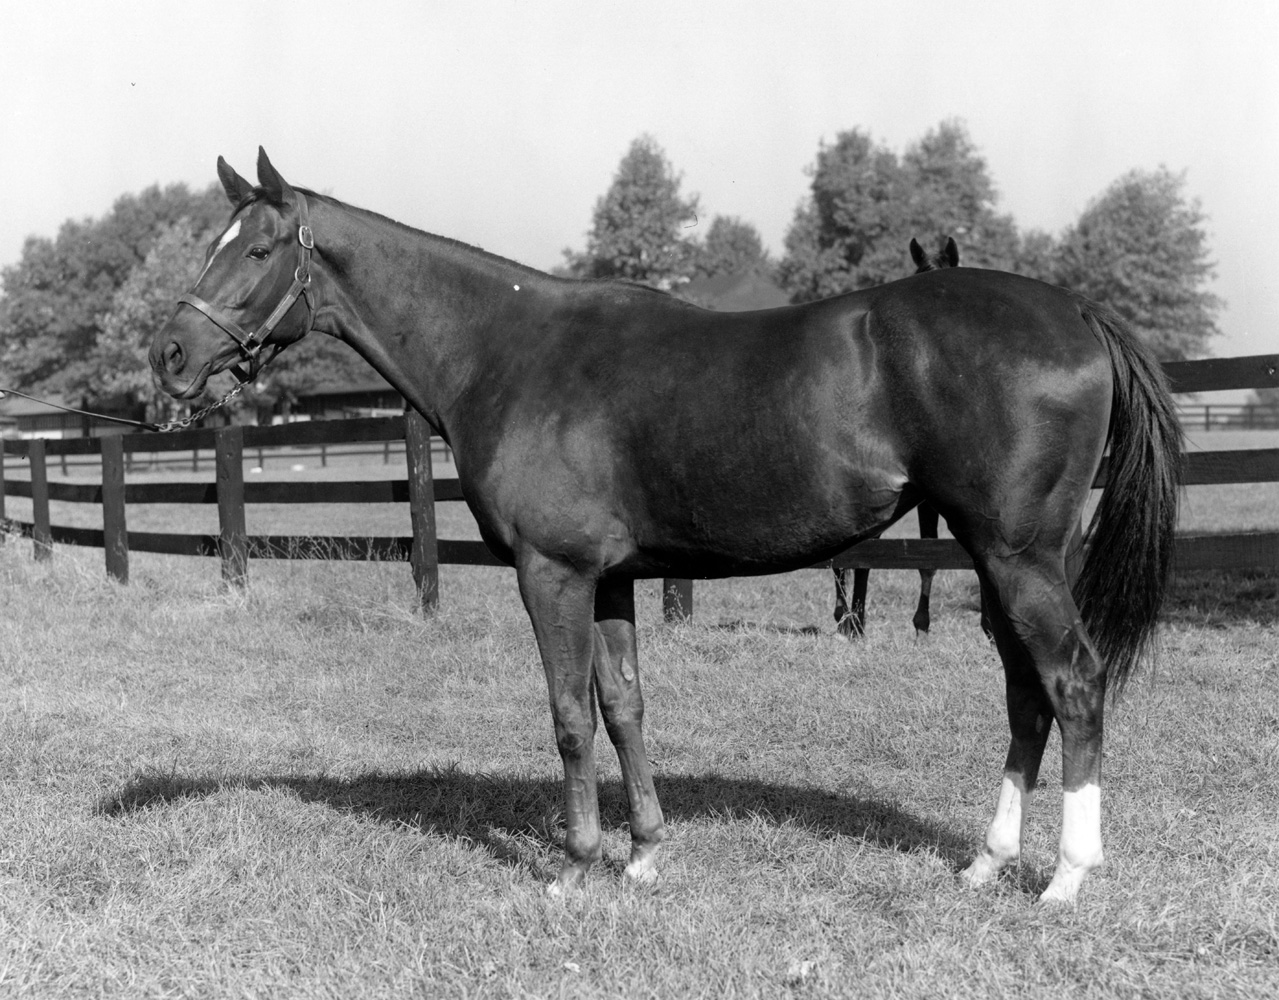 Silver Spoon at Keeneland, October 1959 (Keeneland Library Meadors Collection/Museum Collection)